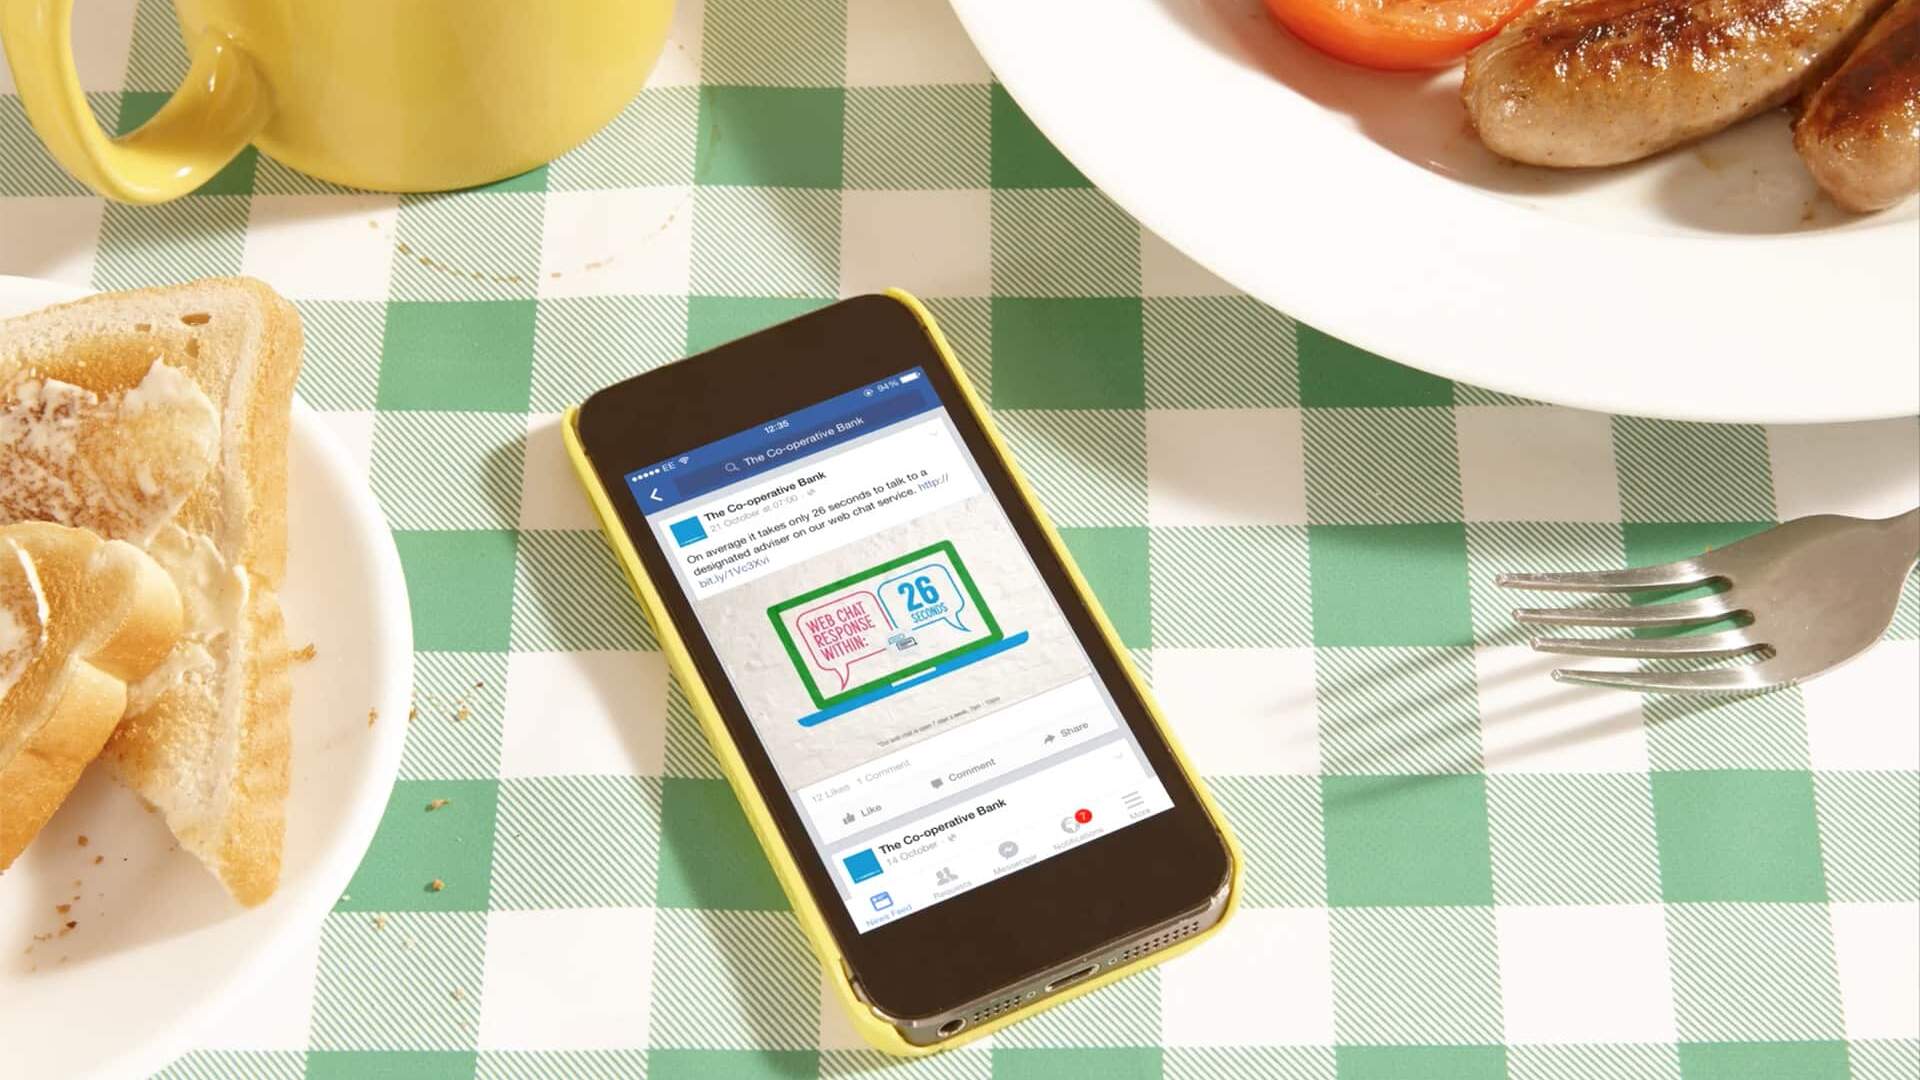 Facebook advertising for retail banking from the Co-operative Bank